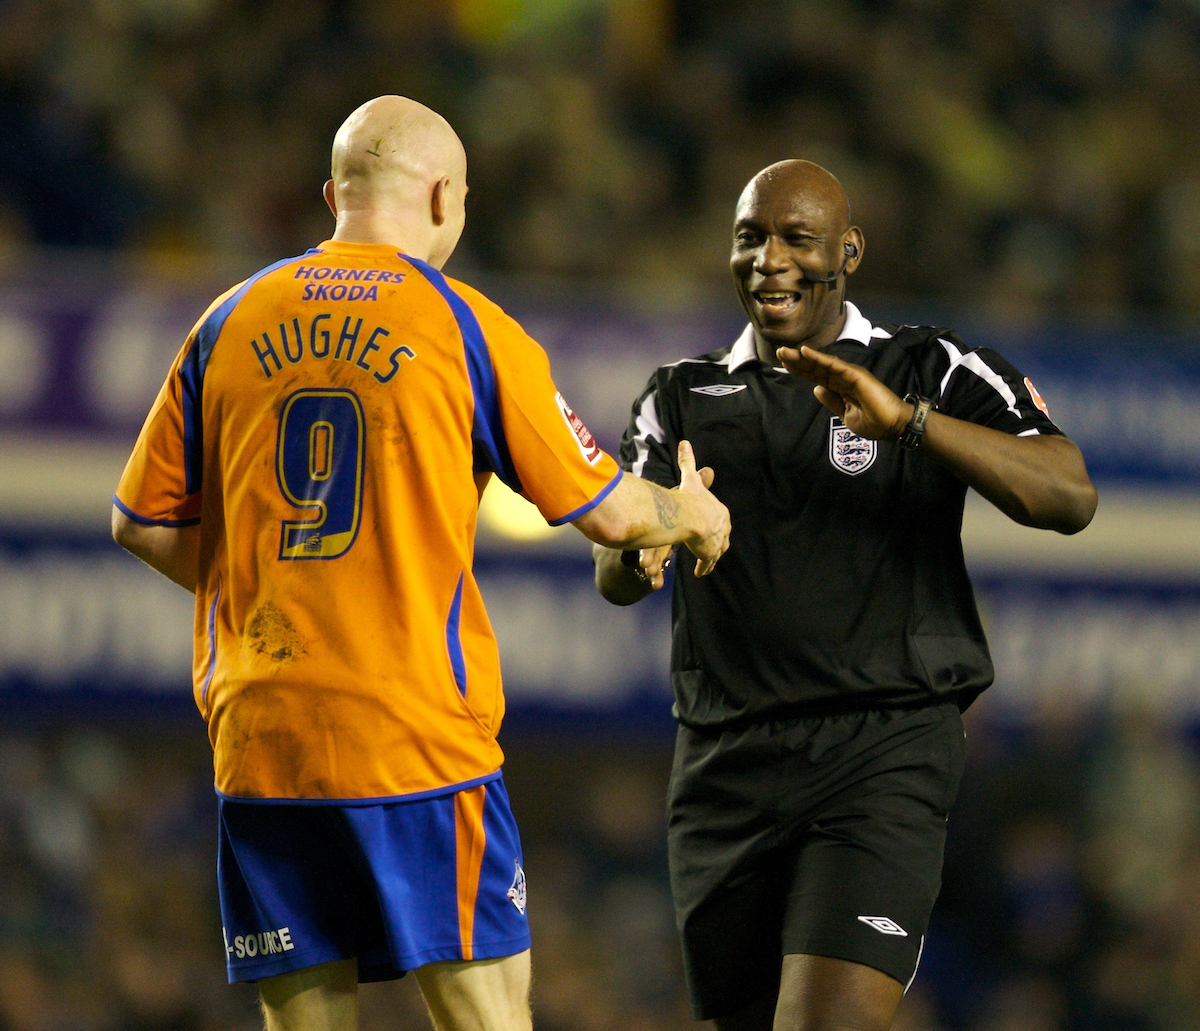 Oldham Athletic's Lee Hughes and referee Uriah Rennie his side's 1-0 victory over Everton during the FA Cup 3rd Round match at Goodison Park